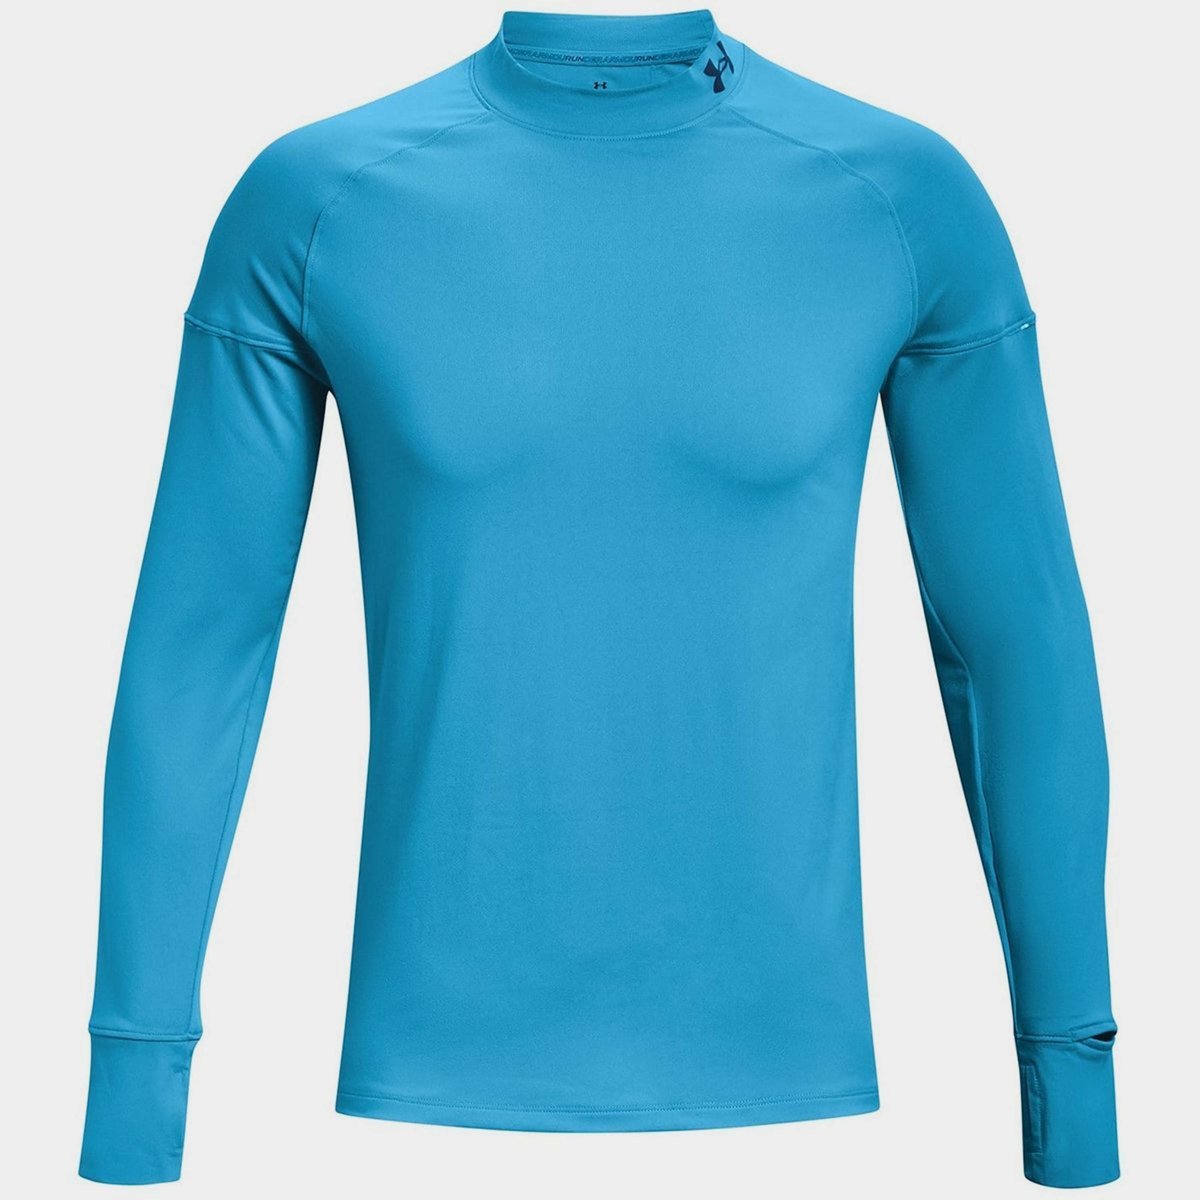 Under Armour Women's OutRun The Cold Long Sleeve Jersey Black